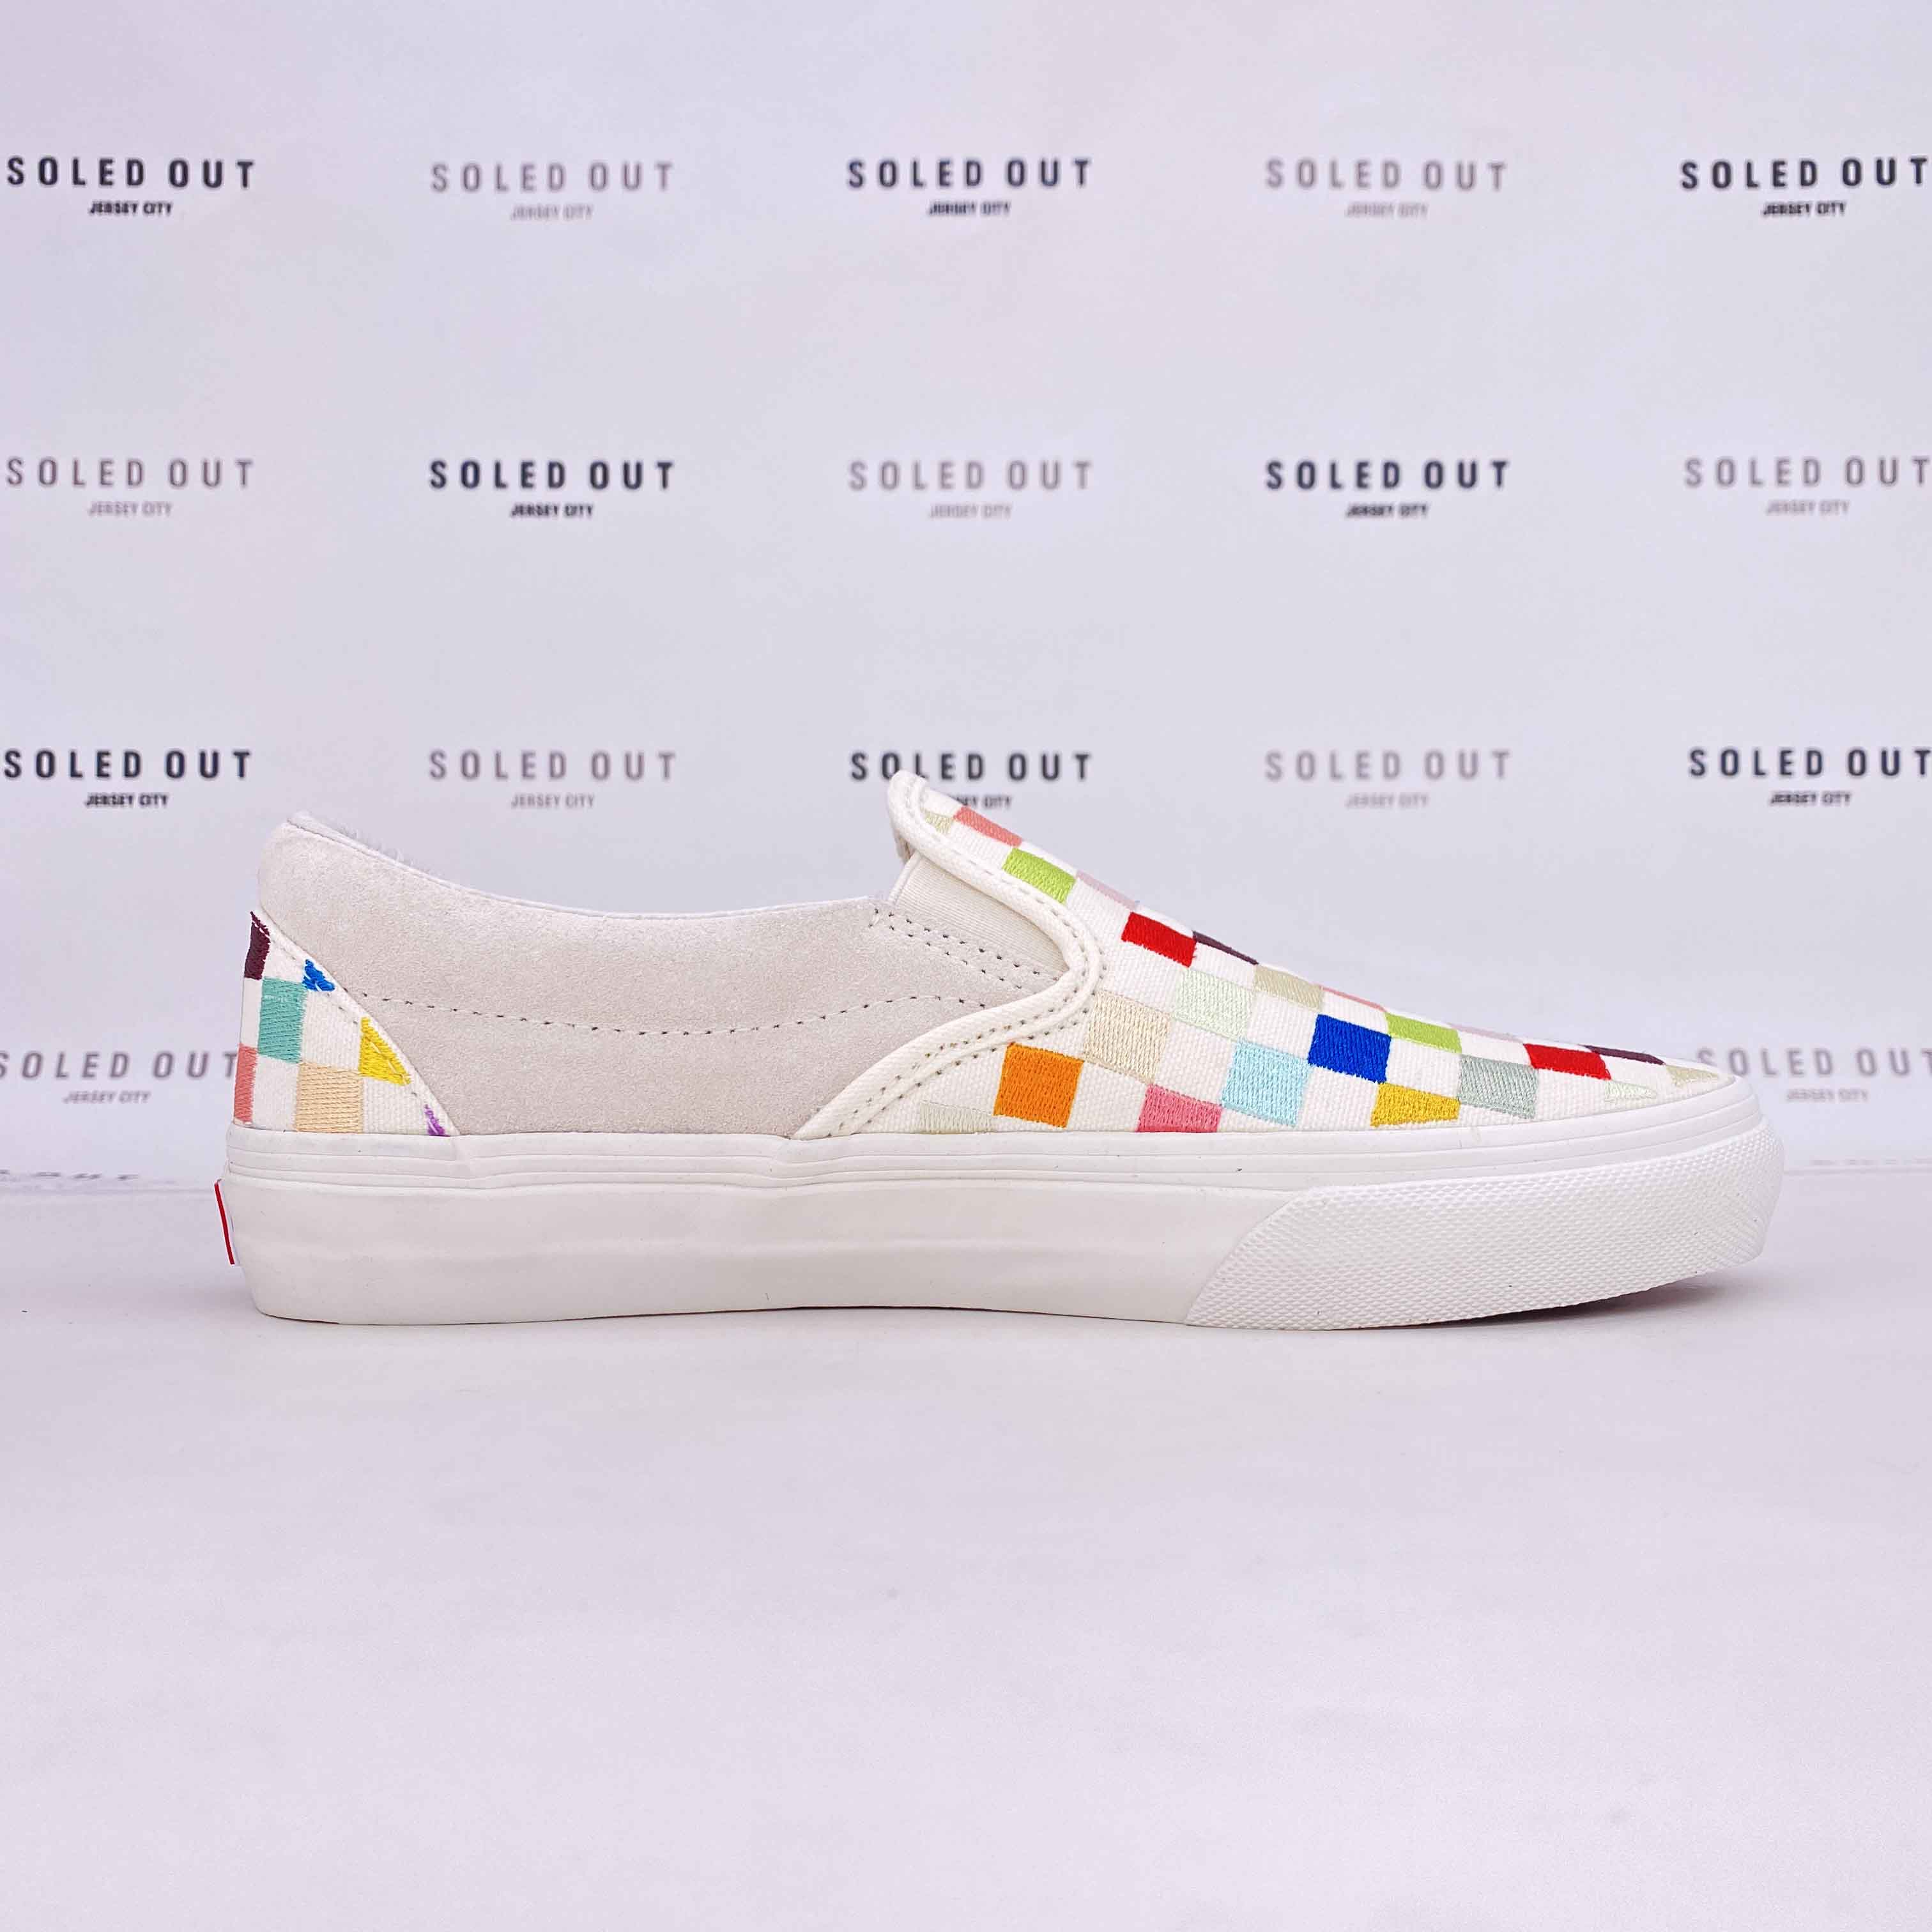 Vans Classic Slip On "Damien Hirst" 2019 New (Cond) Size 7